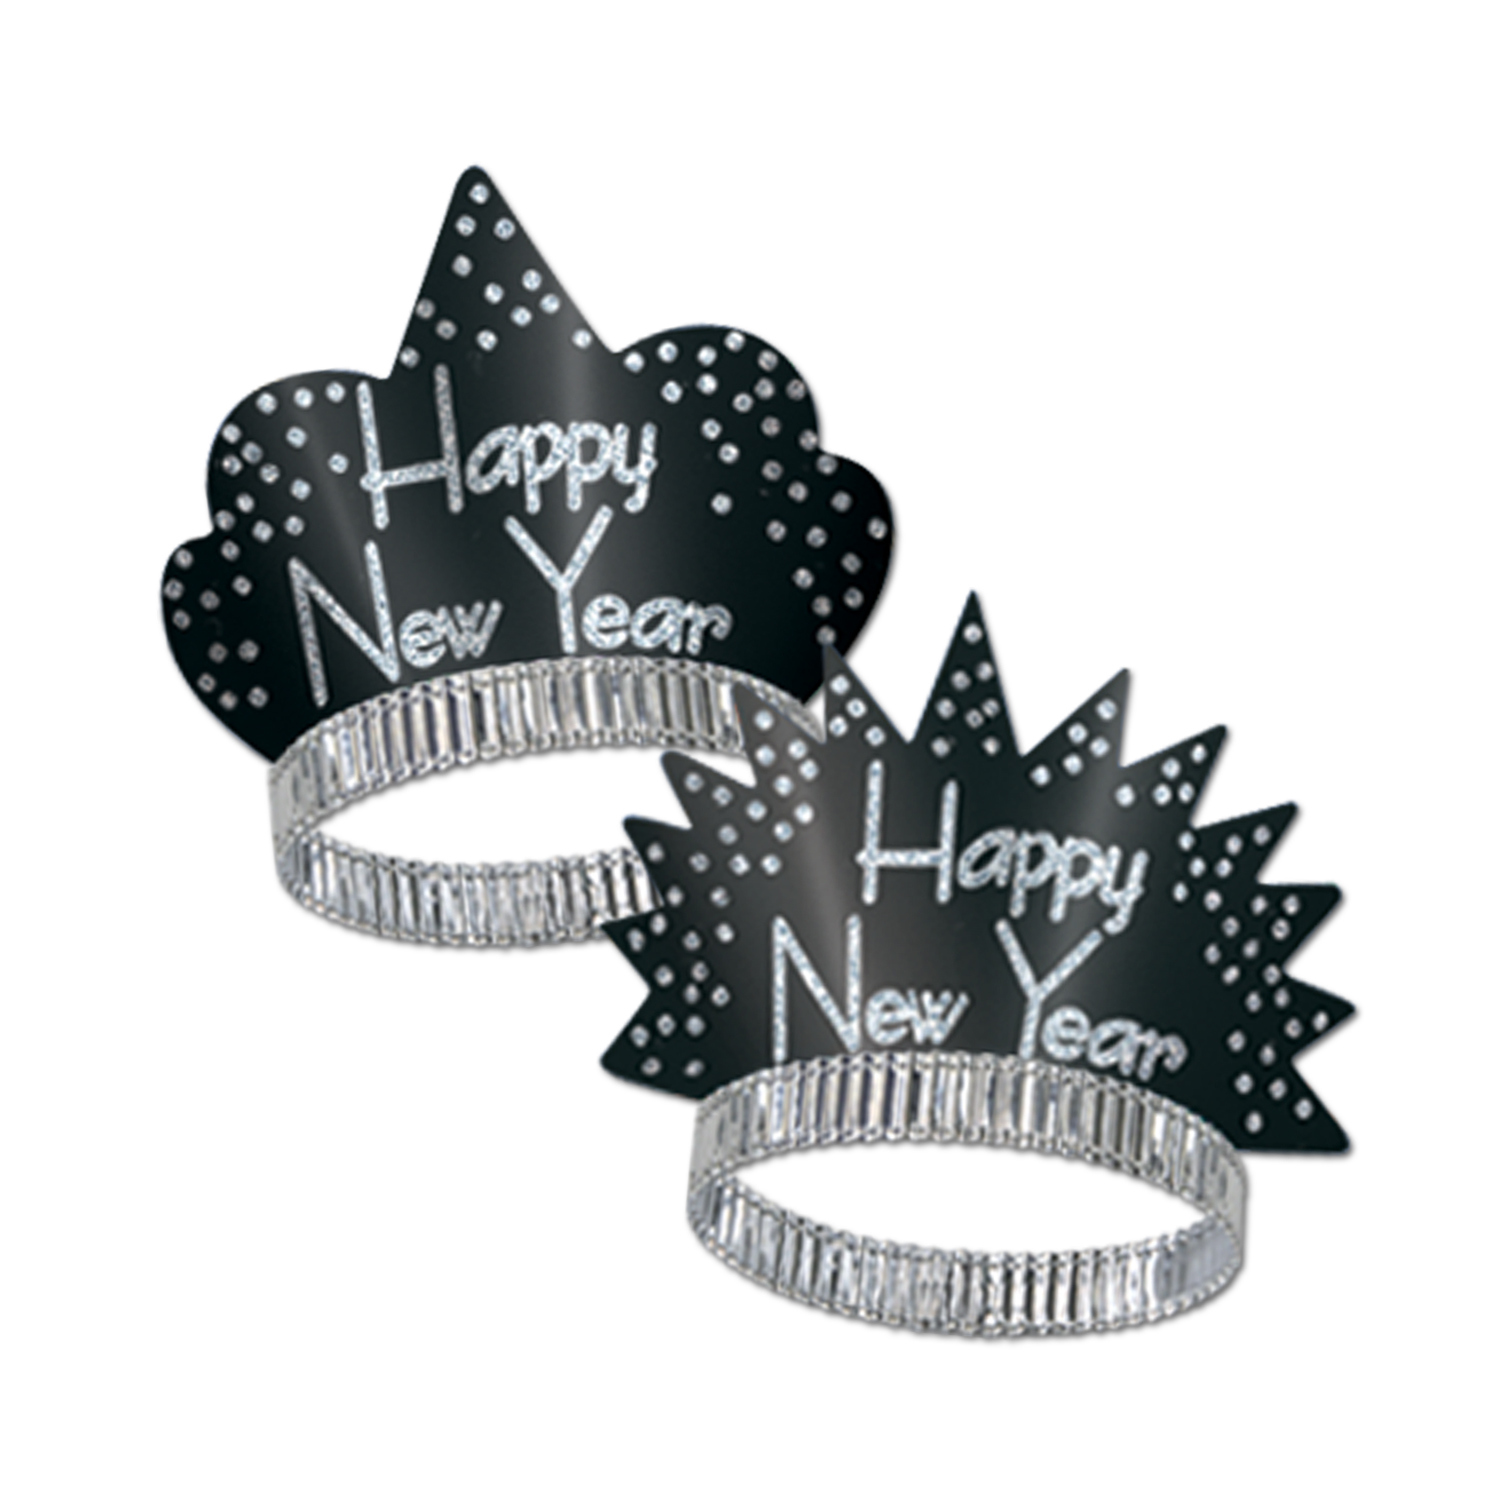 Two different shaped tiaras with a black tiara with silver confetti accents and the words "Happy New Year".